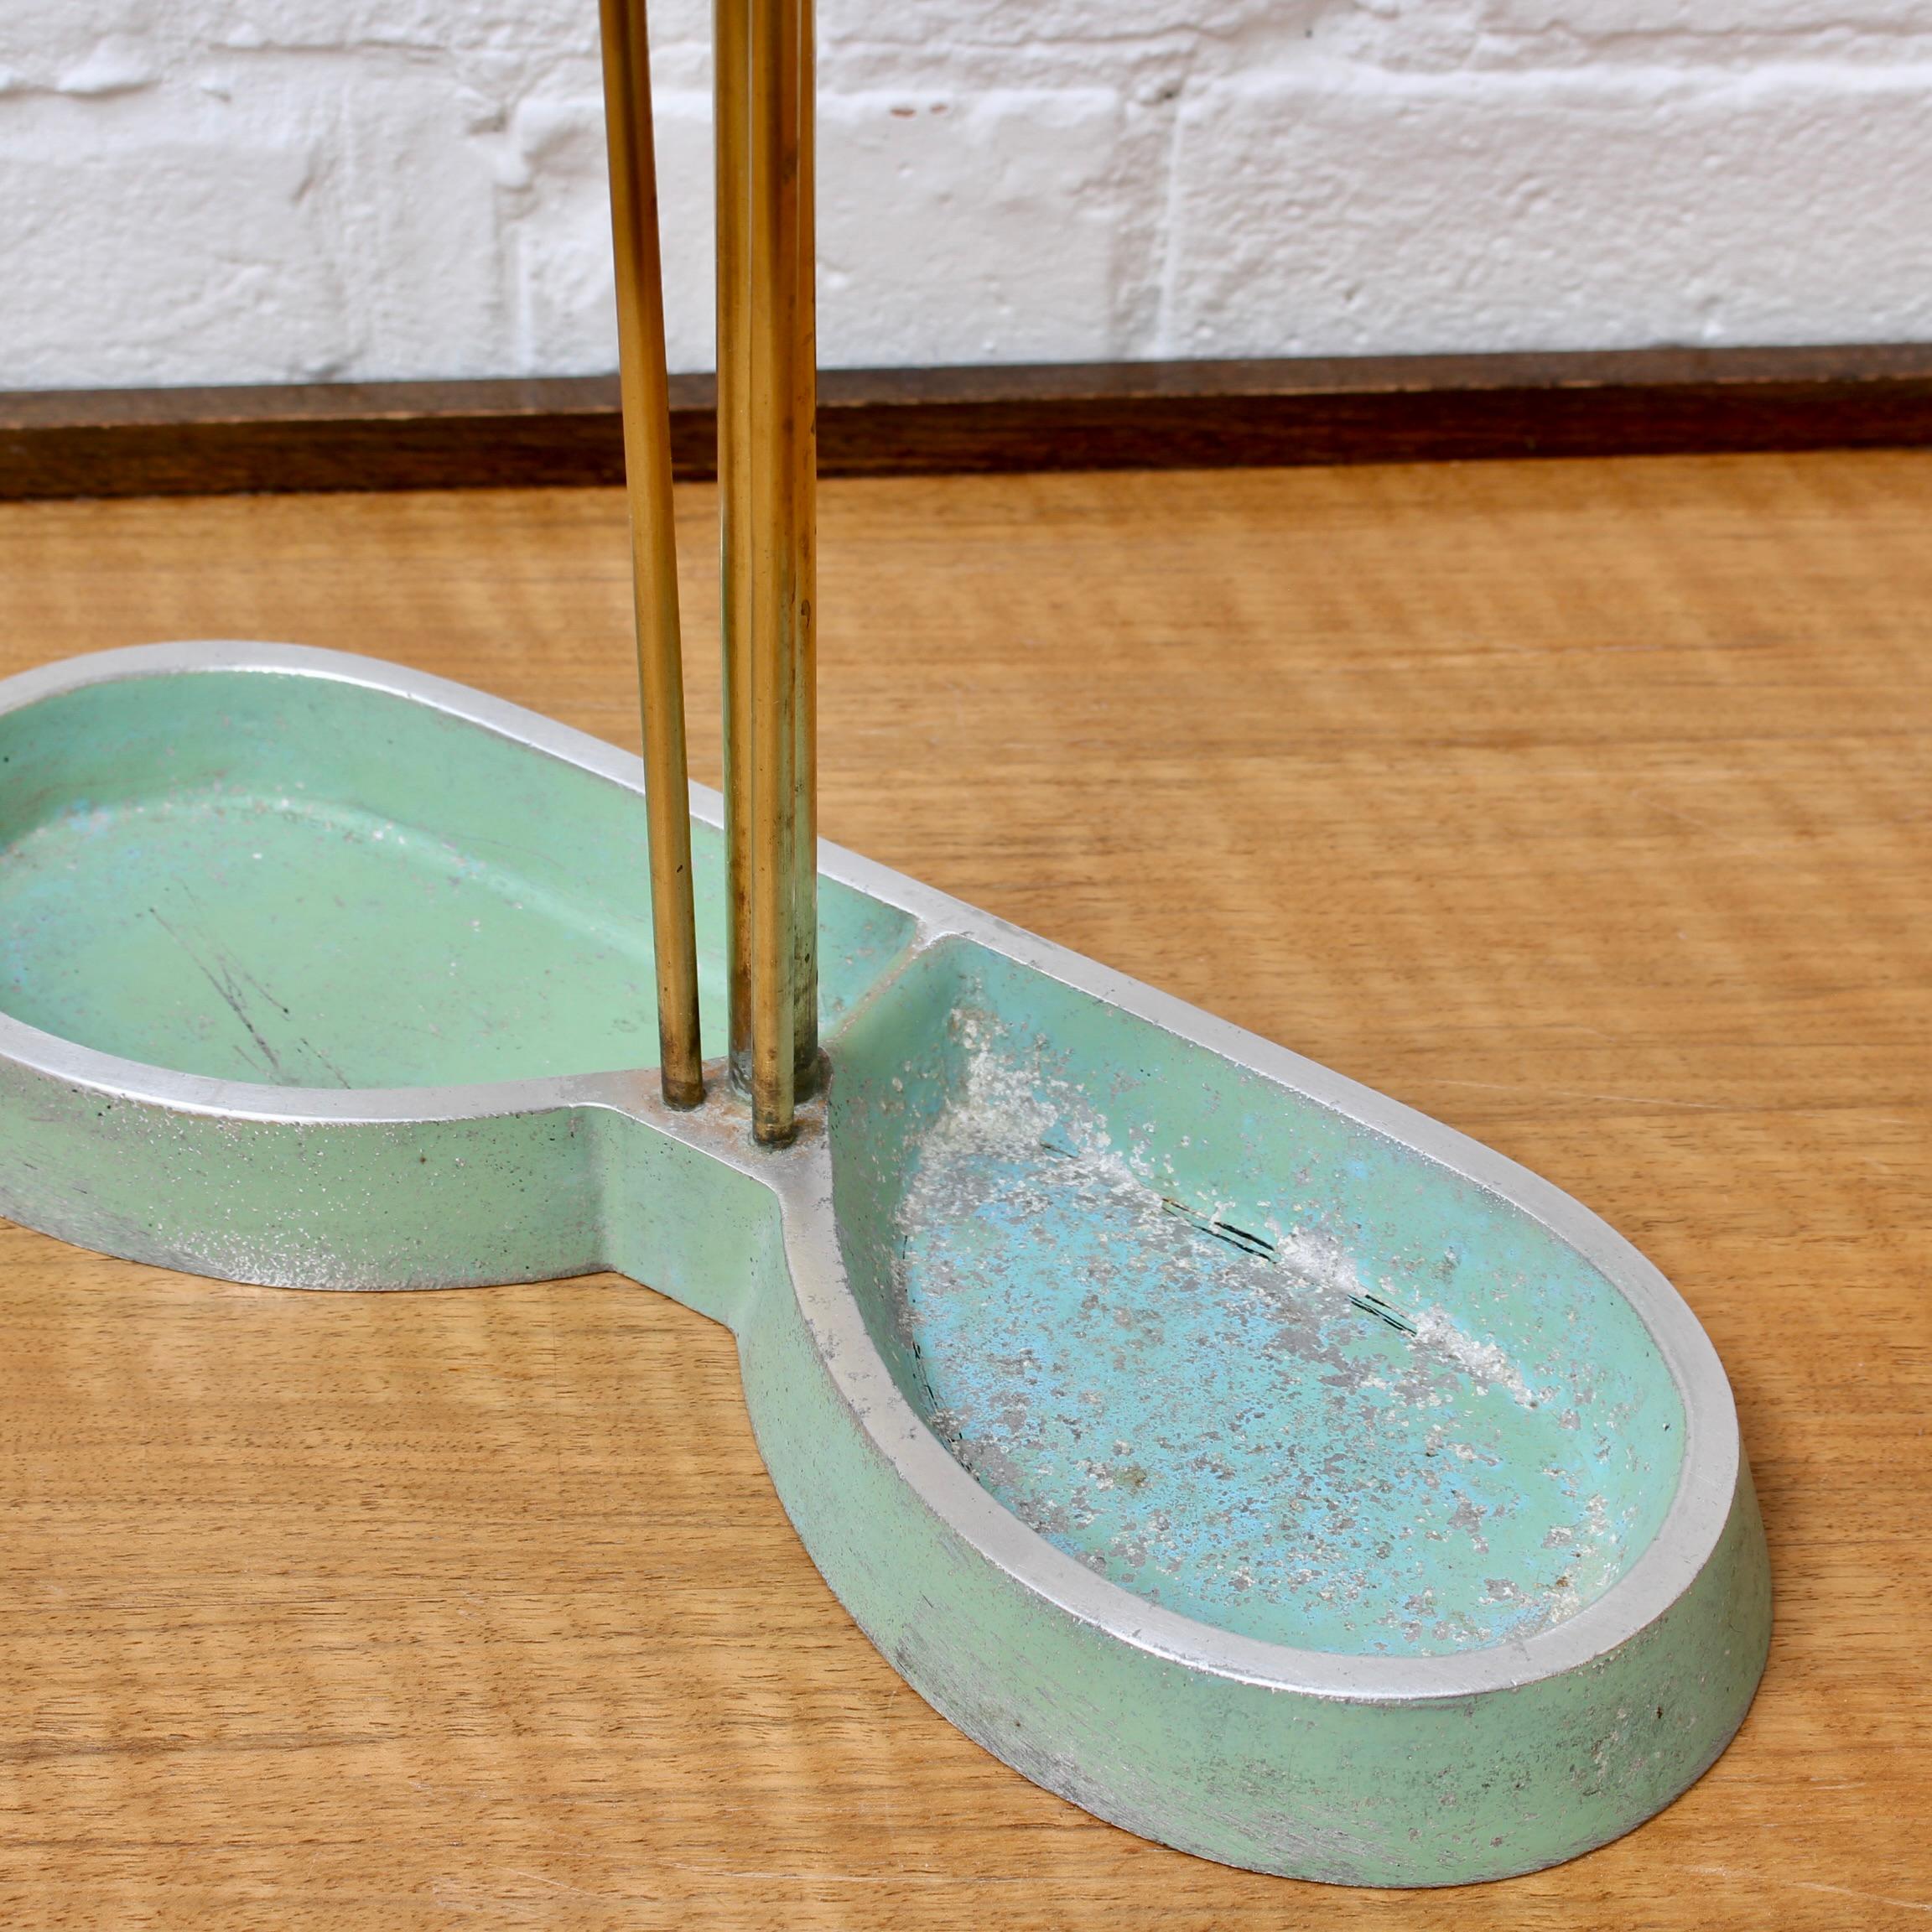 Midcentury Modern Brass Umbrella Stand Attributed to Artes H&H Seefried Steppach For Sale 2